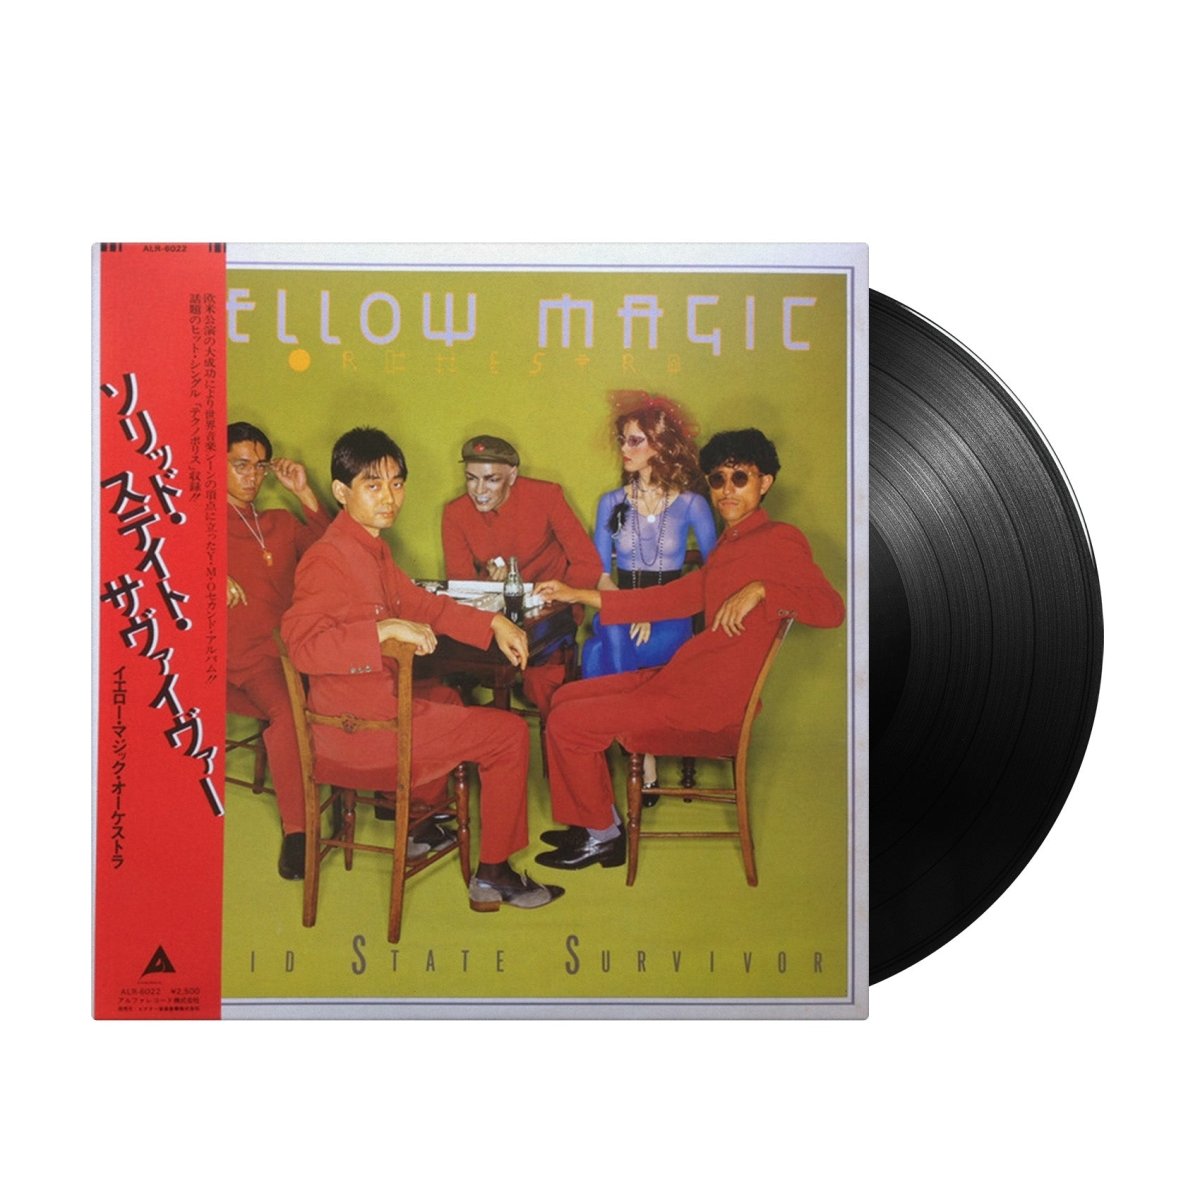 Yellow Magic Orchestra - Solid State Survivor (Japan Import)